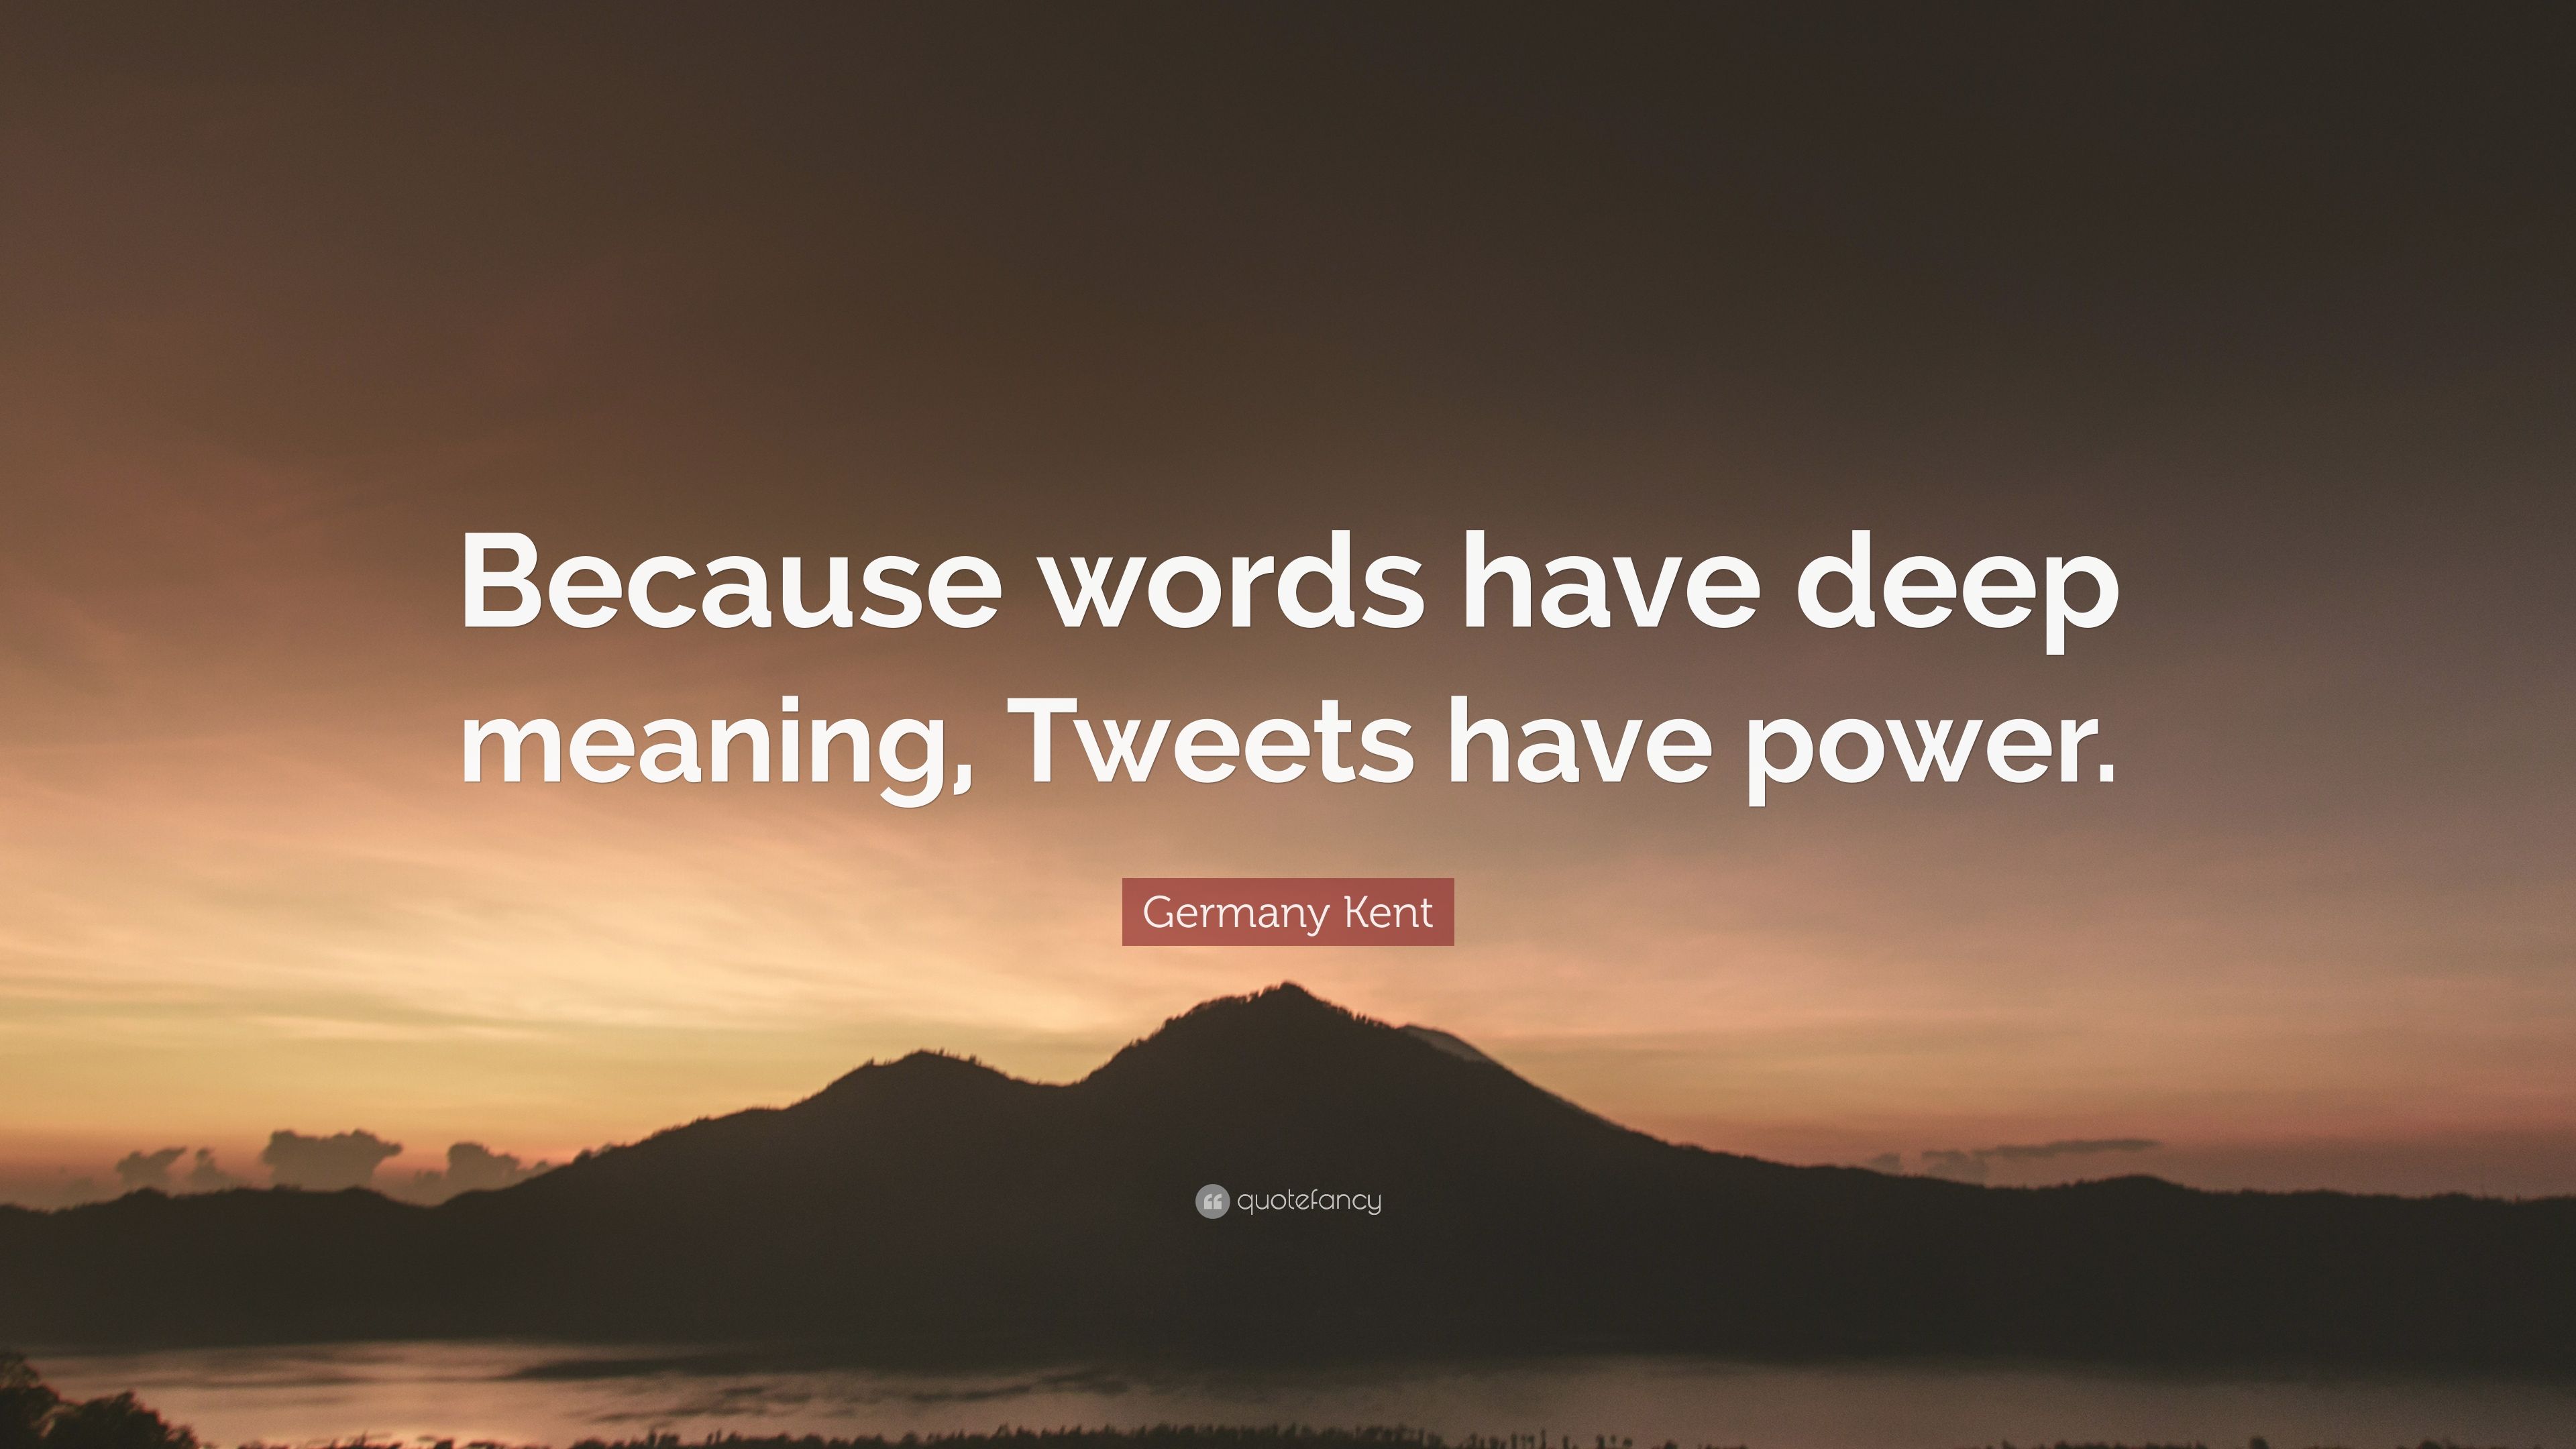 Germany Kent Quote: “Because words have deep meaning, Tweets have